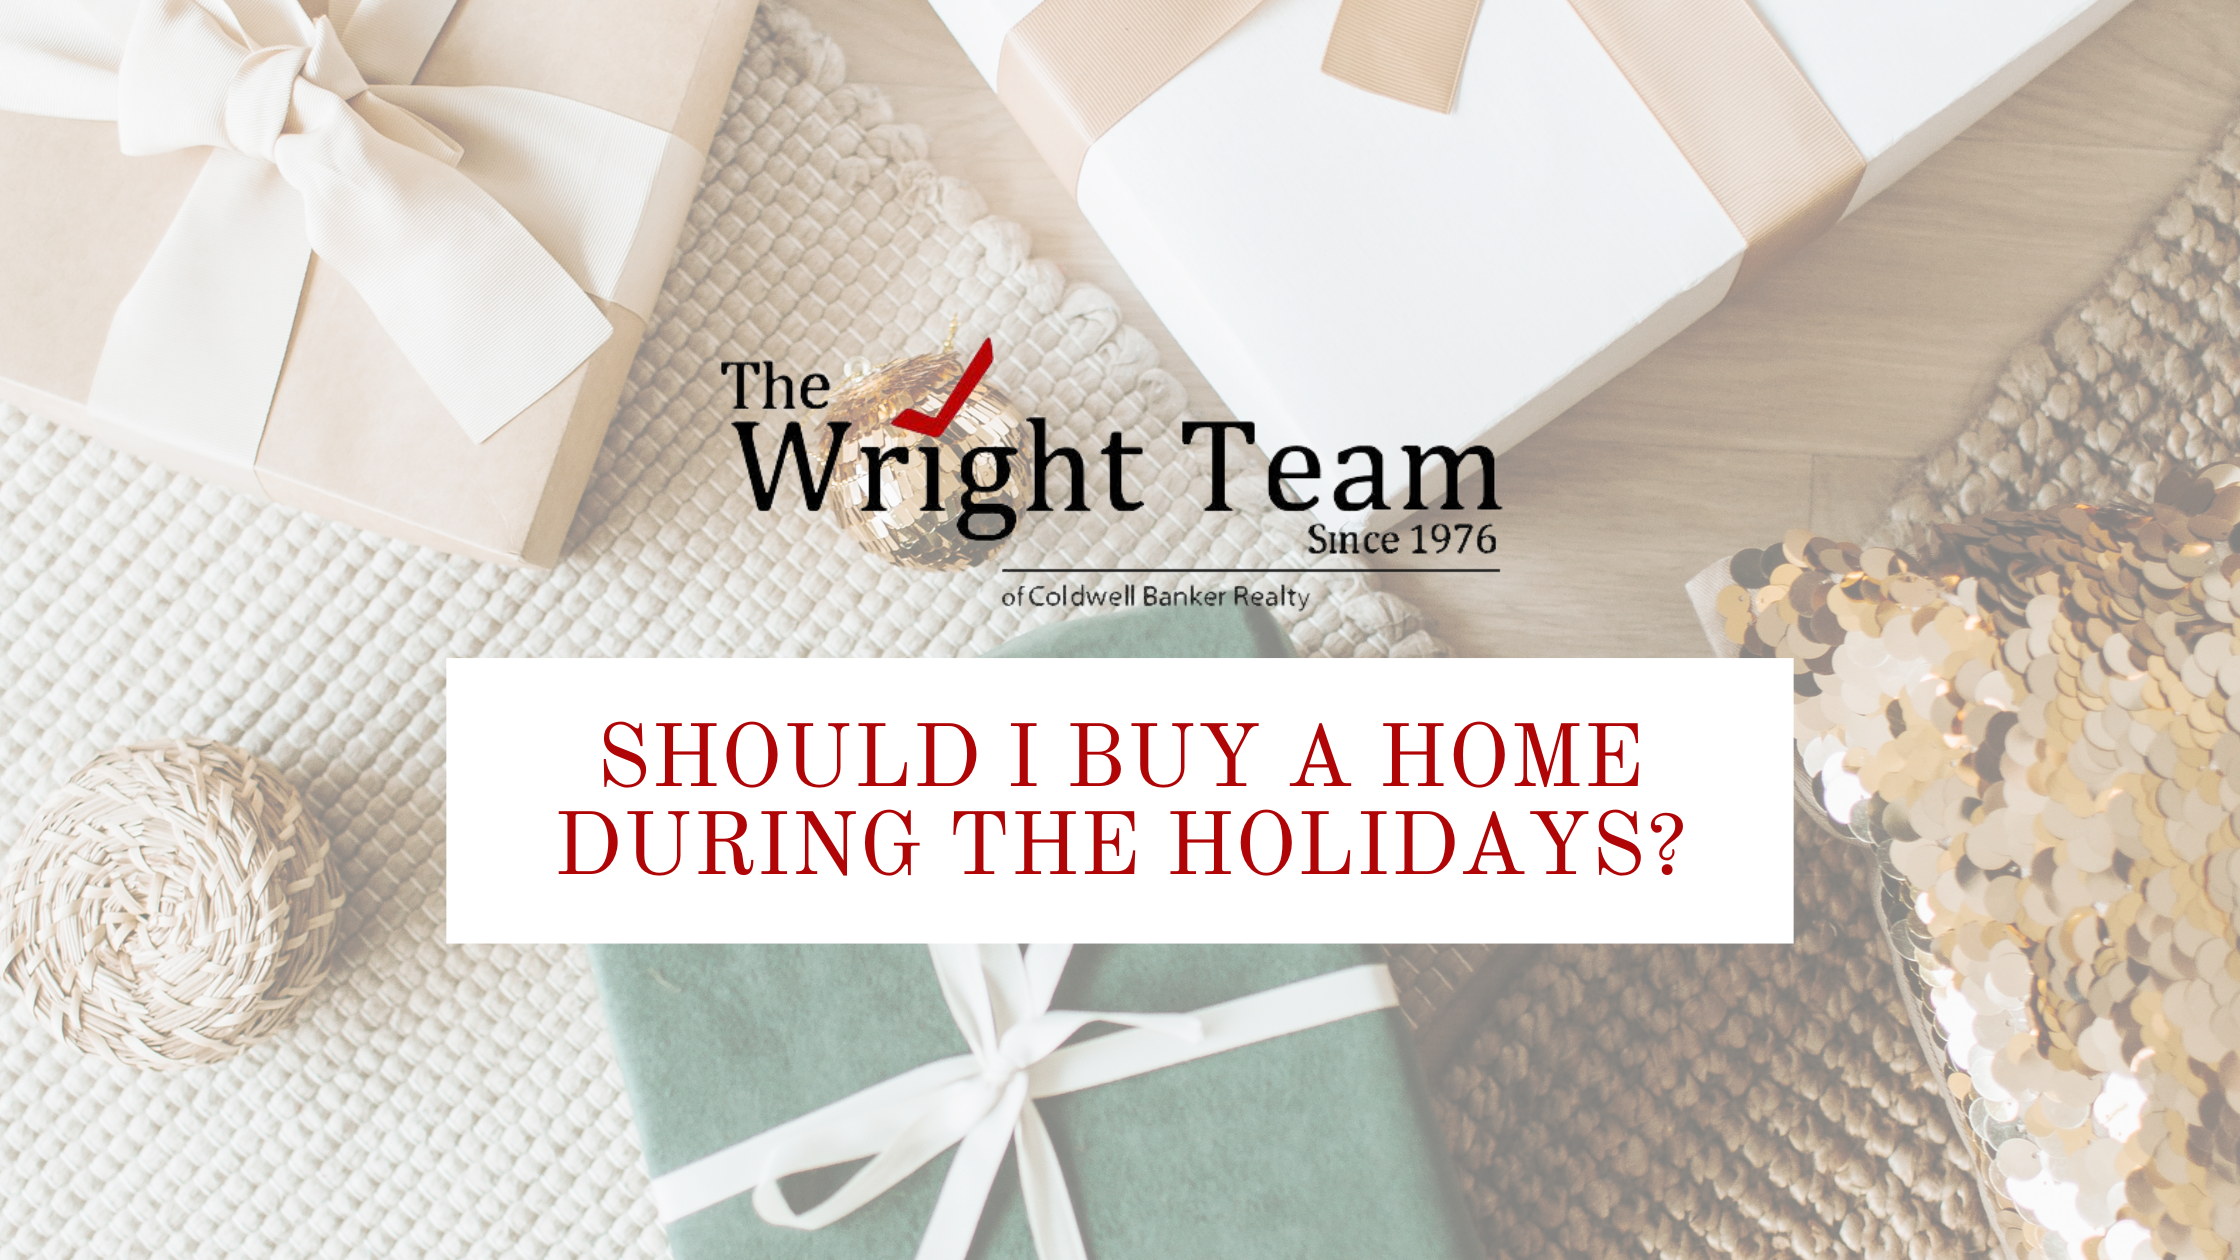 Should I buy a home during the Holidays?